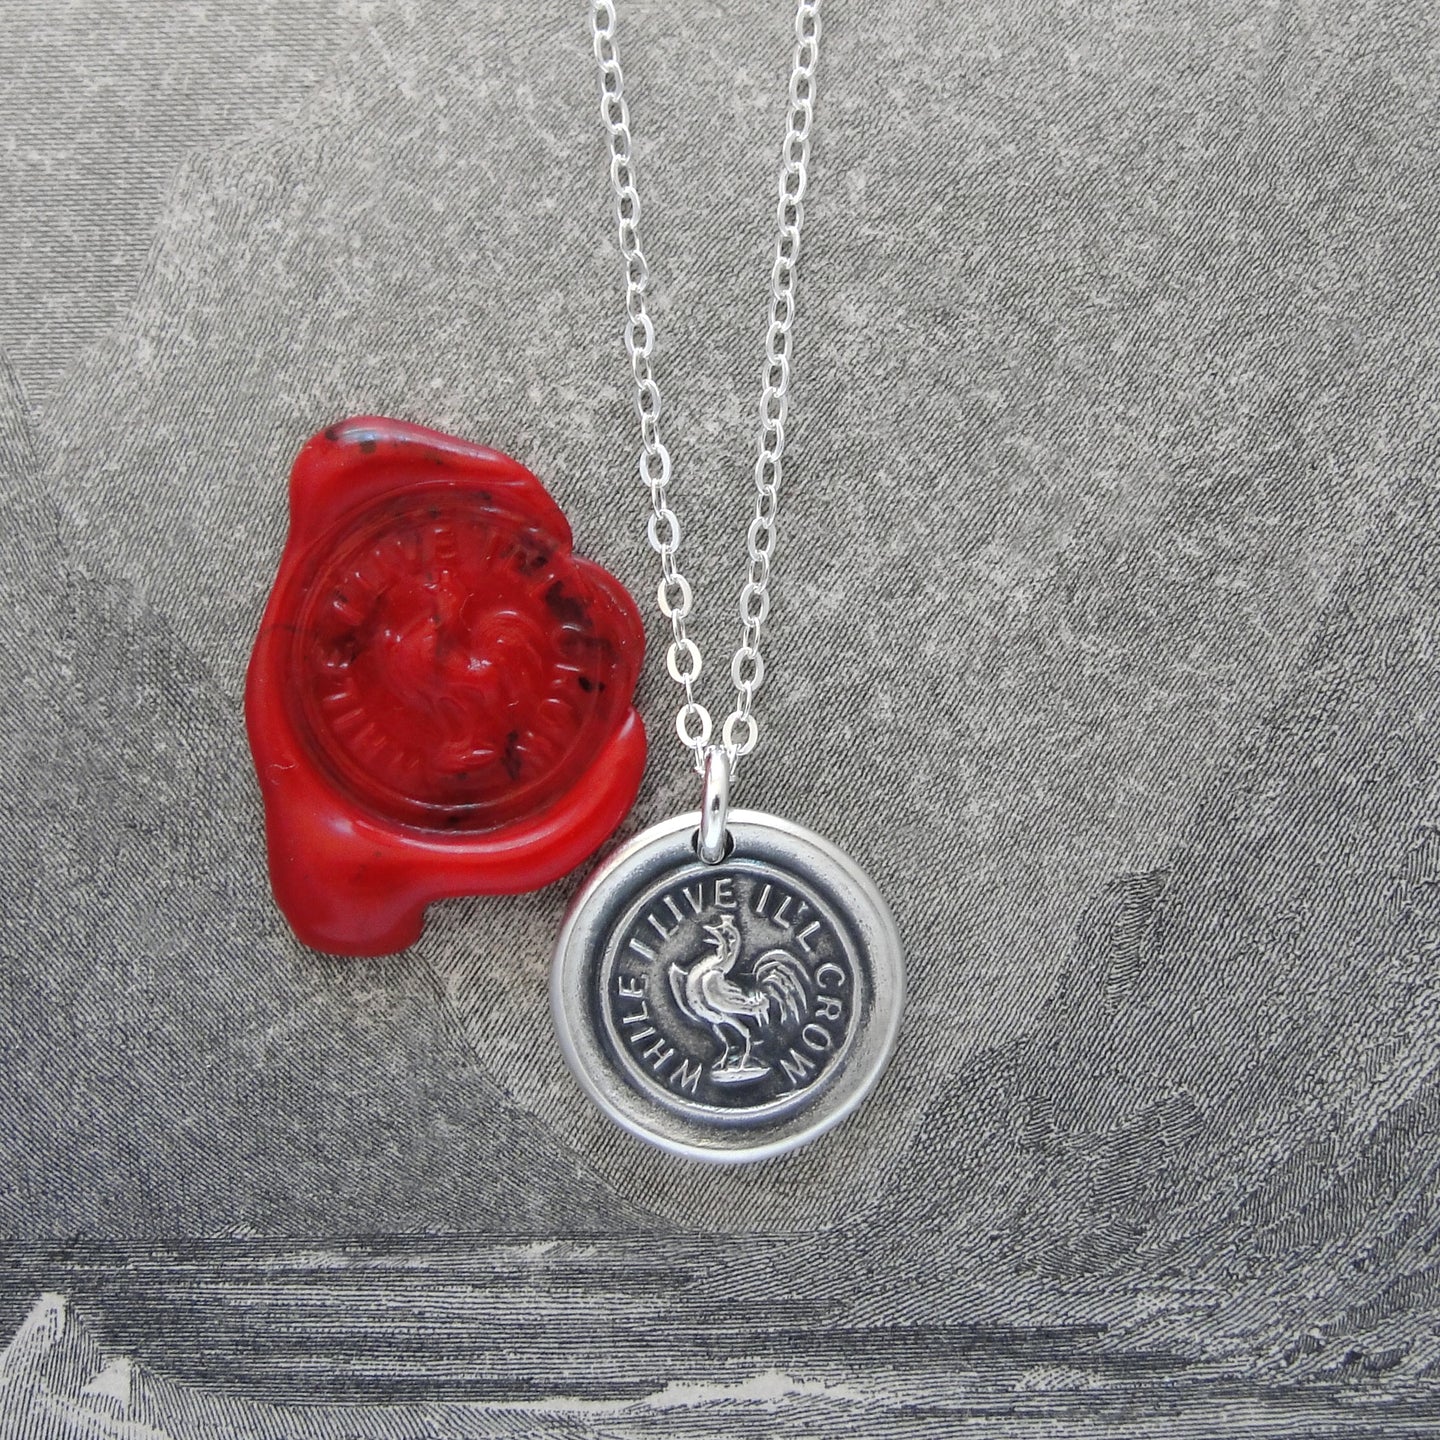 While I Live I'll Crow - Silver Gamecock Wax Seal Necklace Stay Cocky - RQP Studio